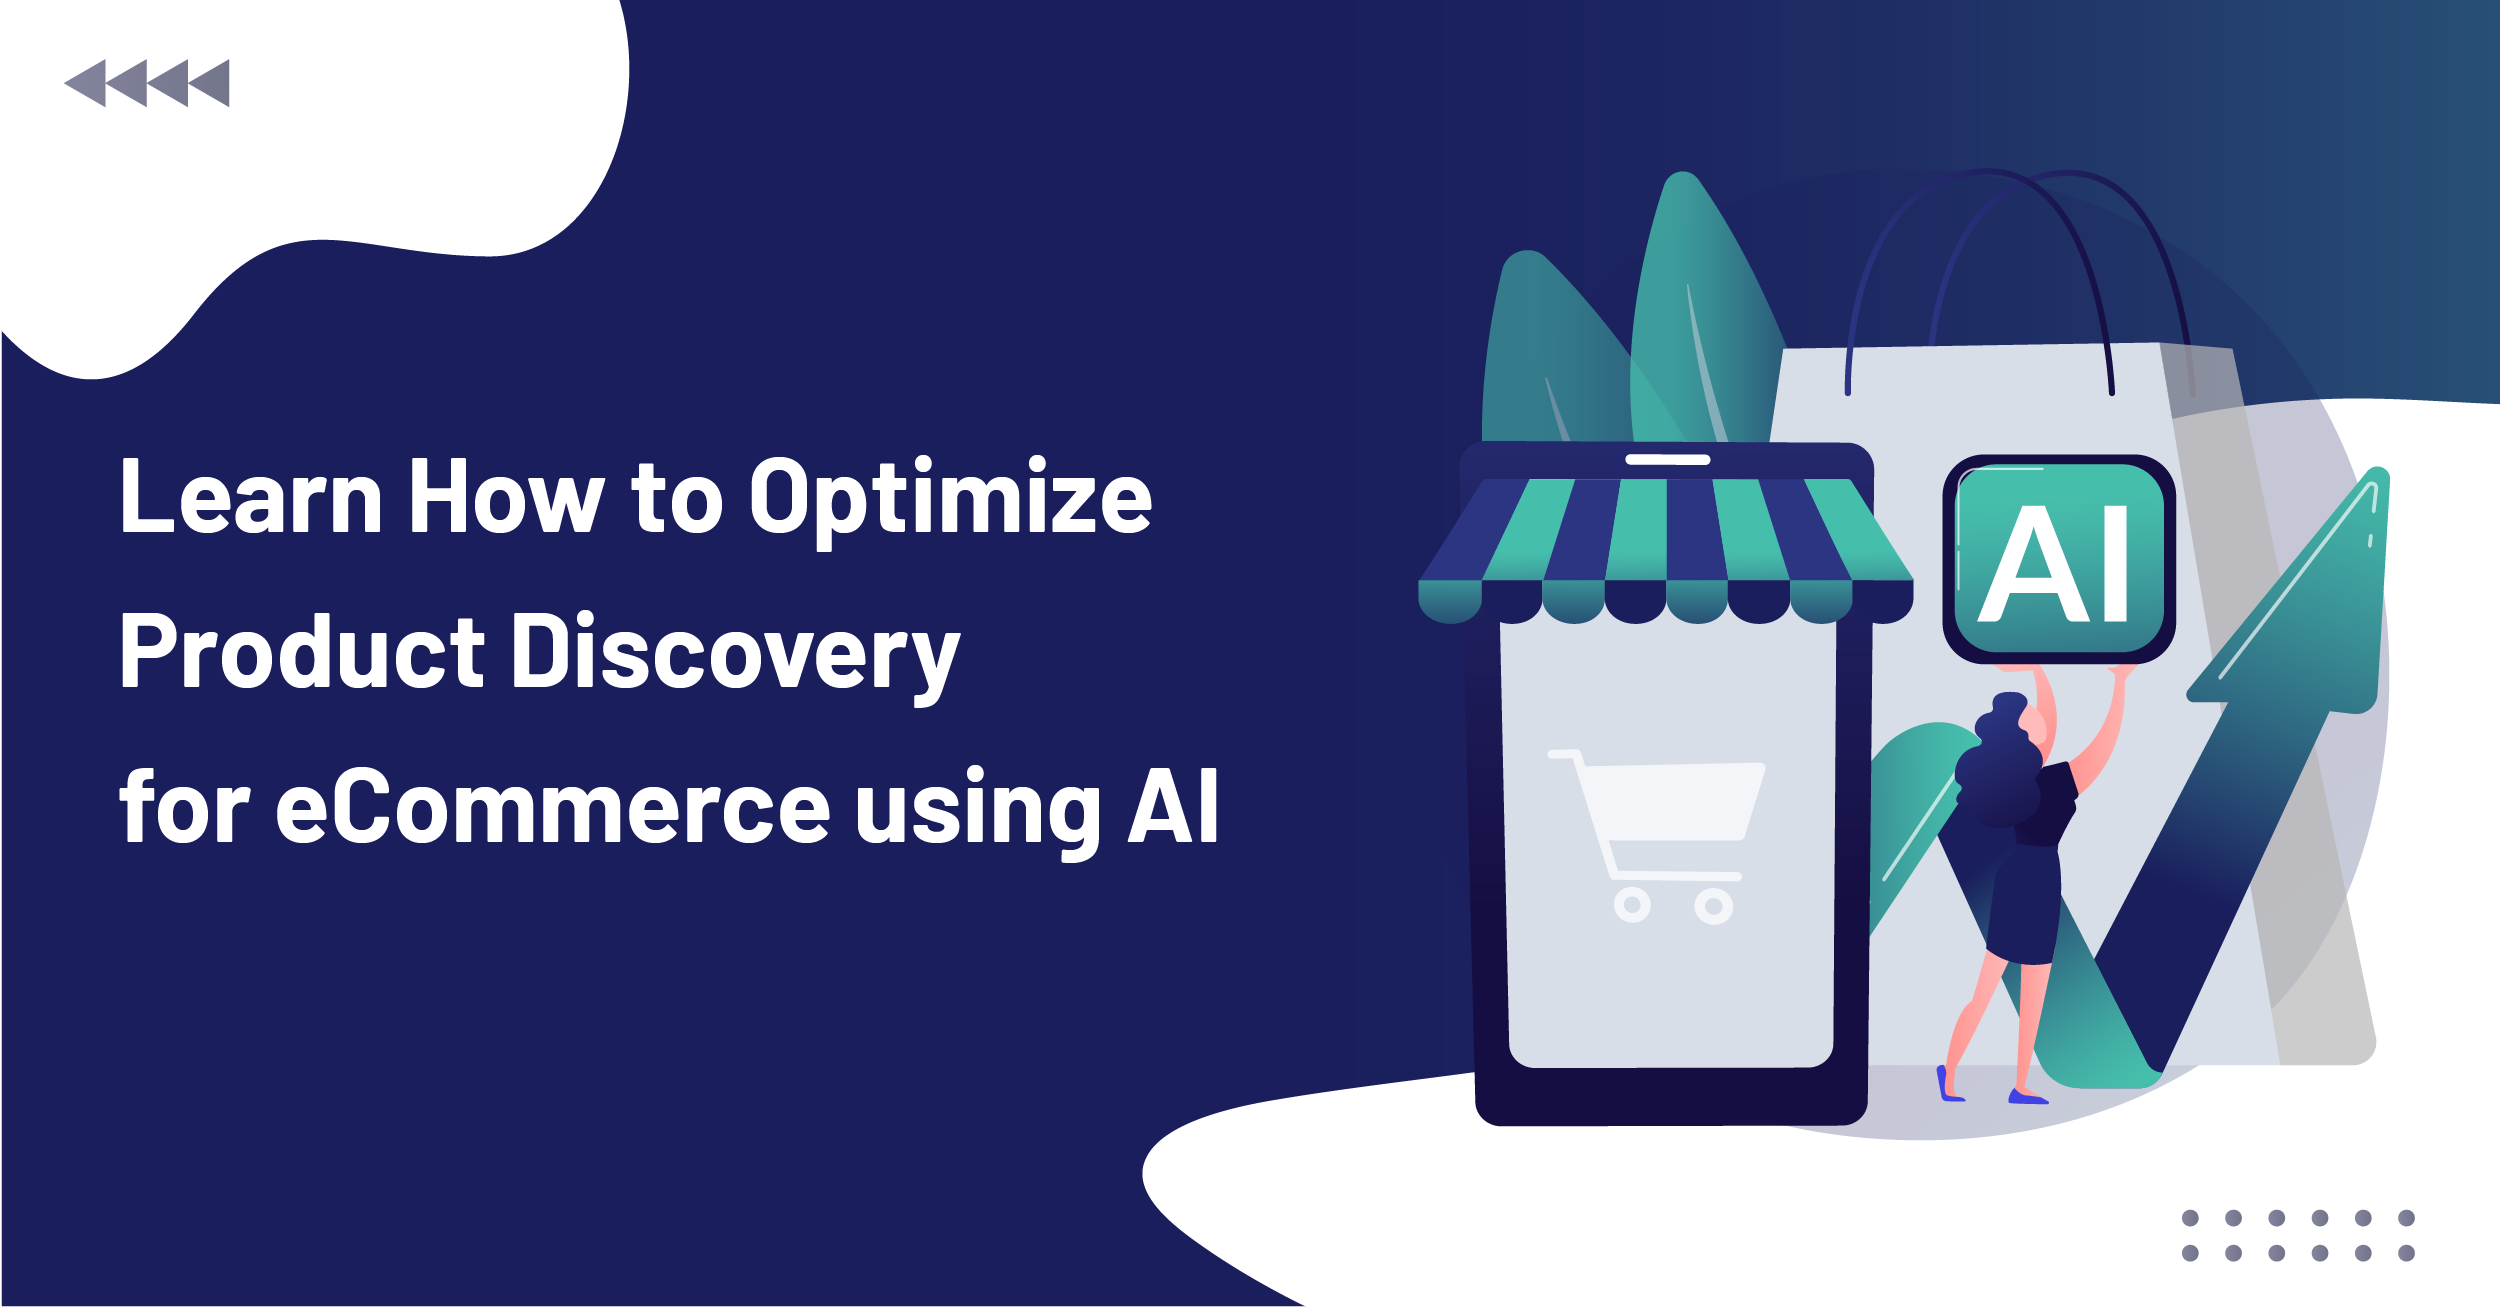 Learn How to Optimize Product Discovery for eCommerce using AI